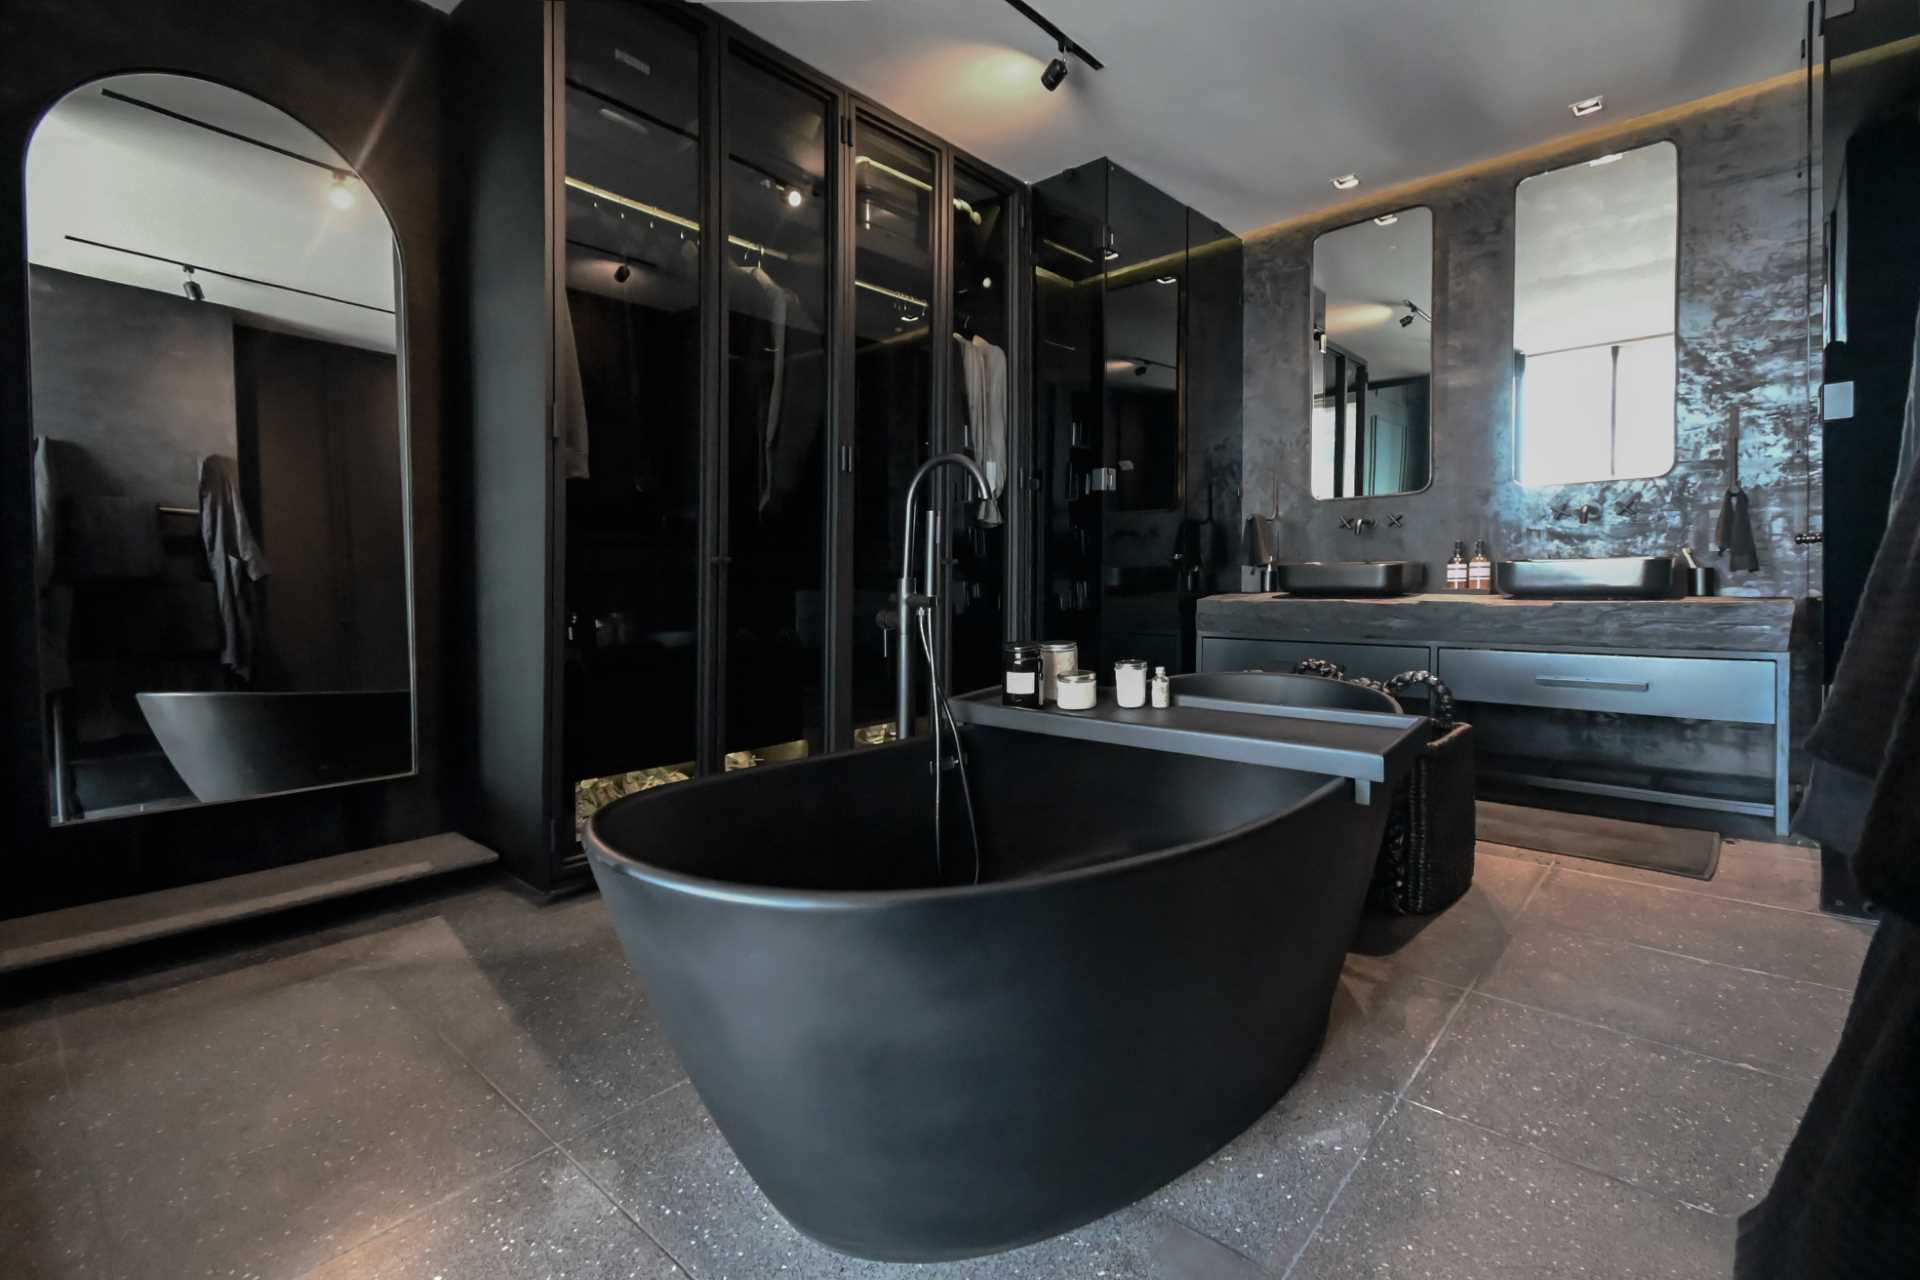 A modern black bathroom includes a freestanding black bathtub in the center of the room, a wall of glass-fronted closets, and a double vanity. The toilet and shower are located behind glass boxes on either side of the vanity.